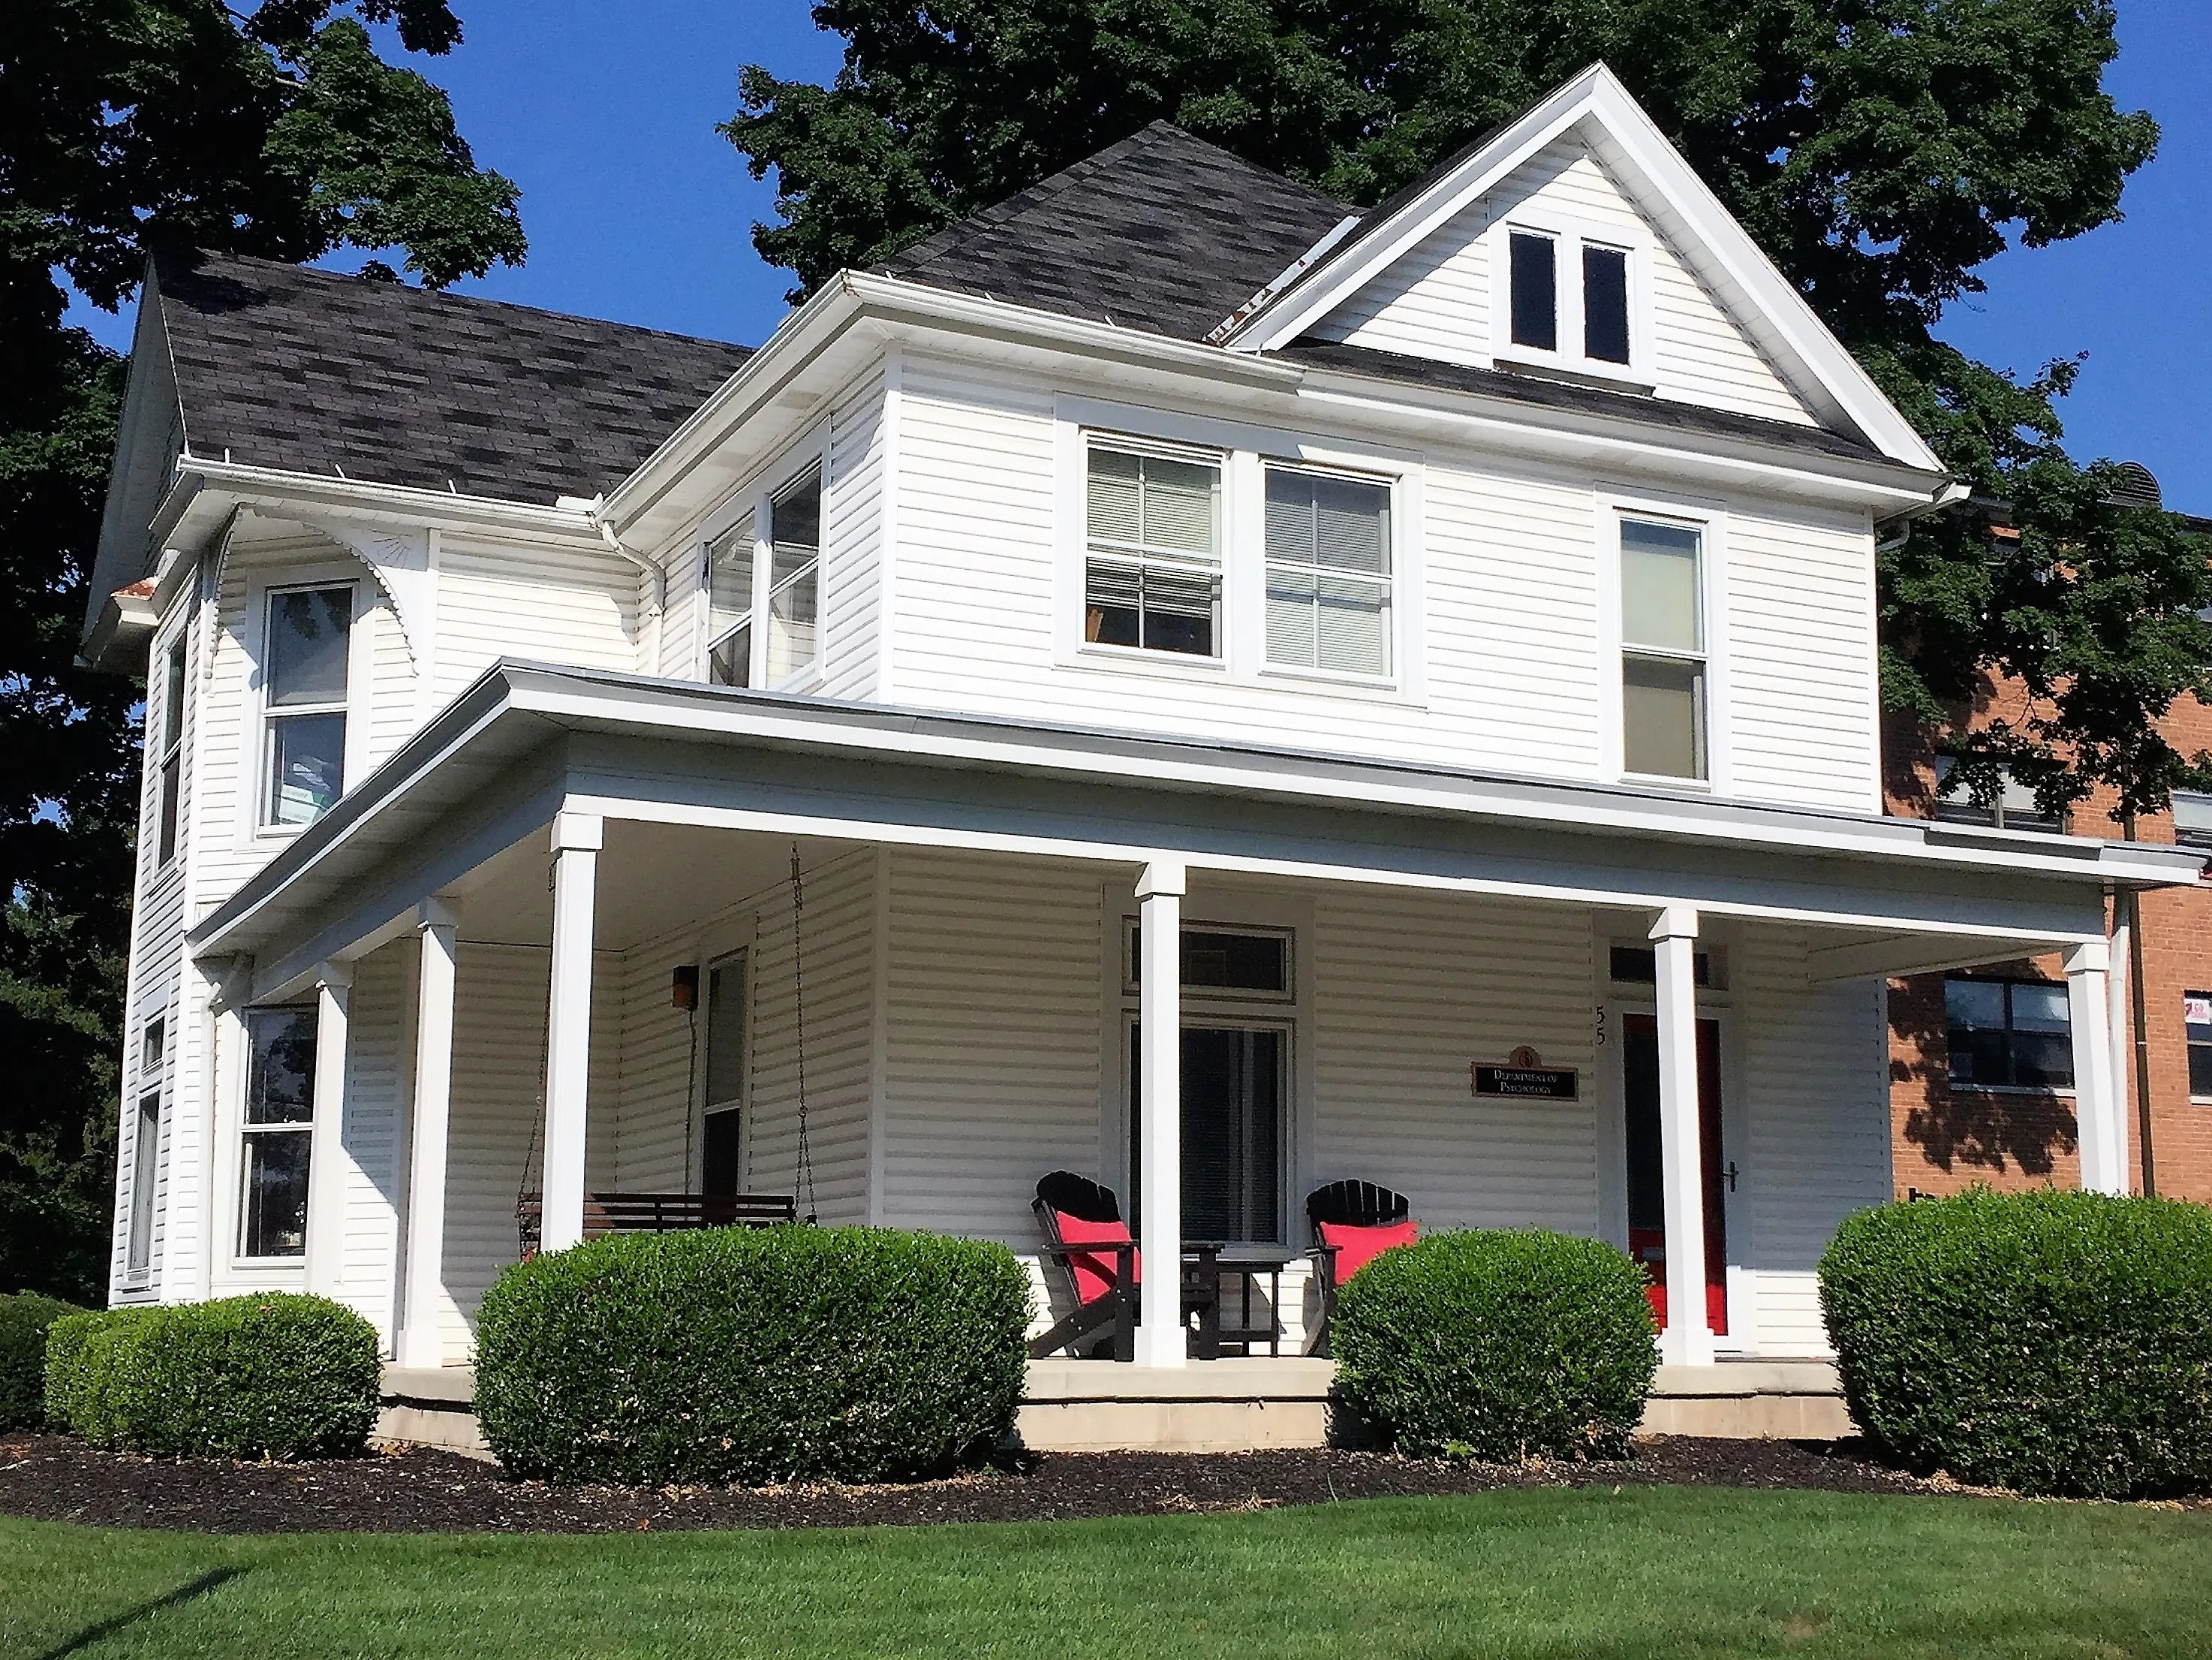 The Psychology House is a three story white house with an inviting and welcoming front porch.